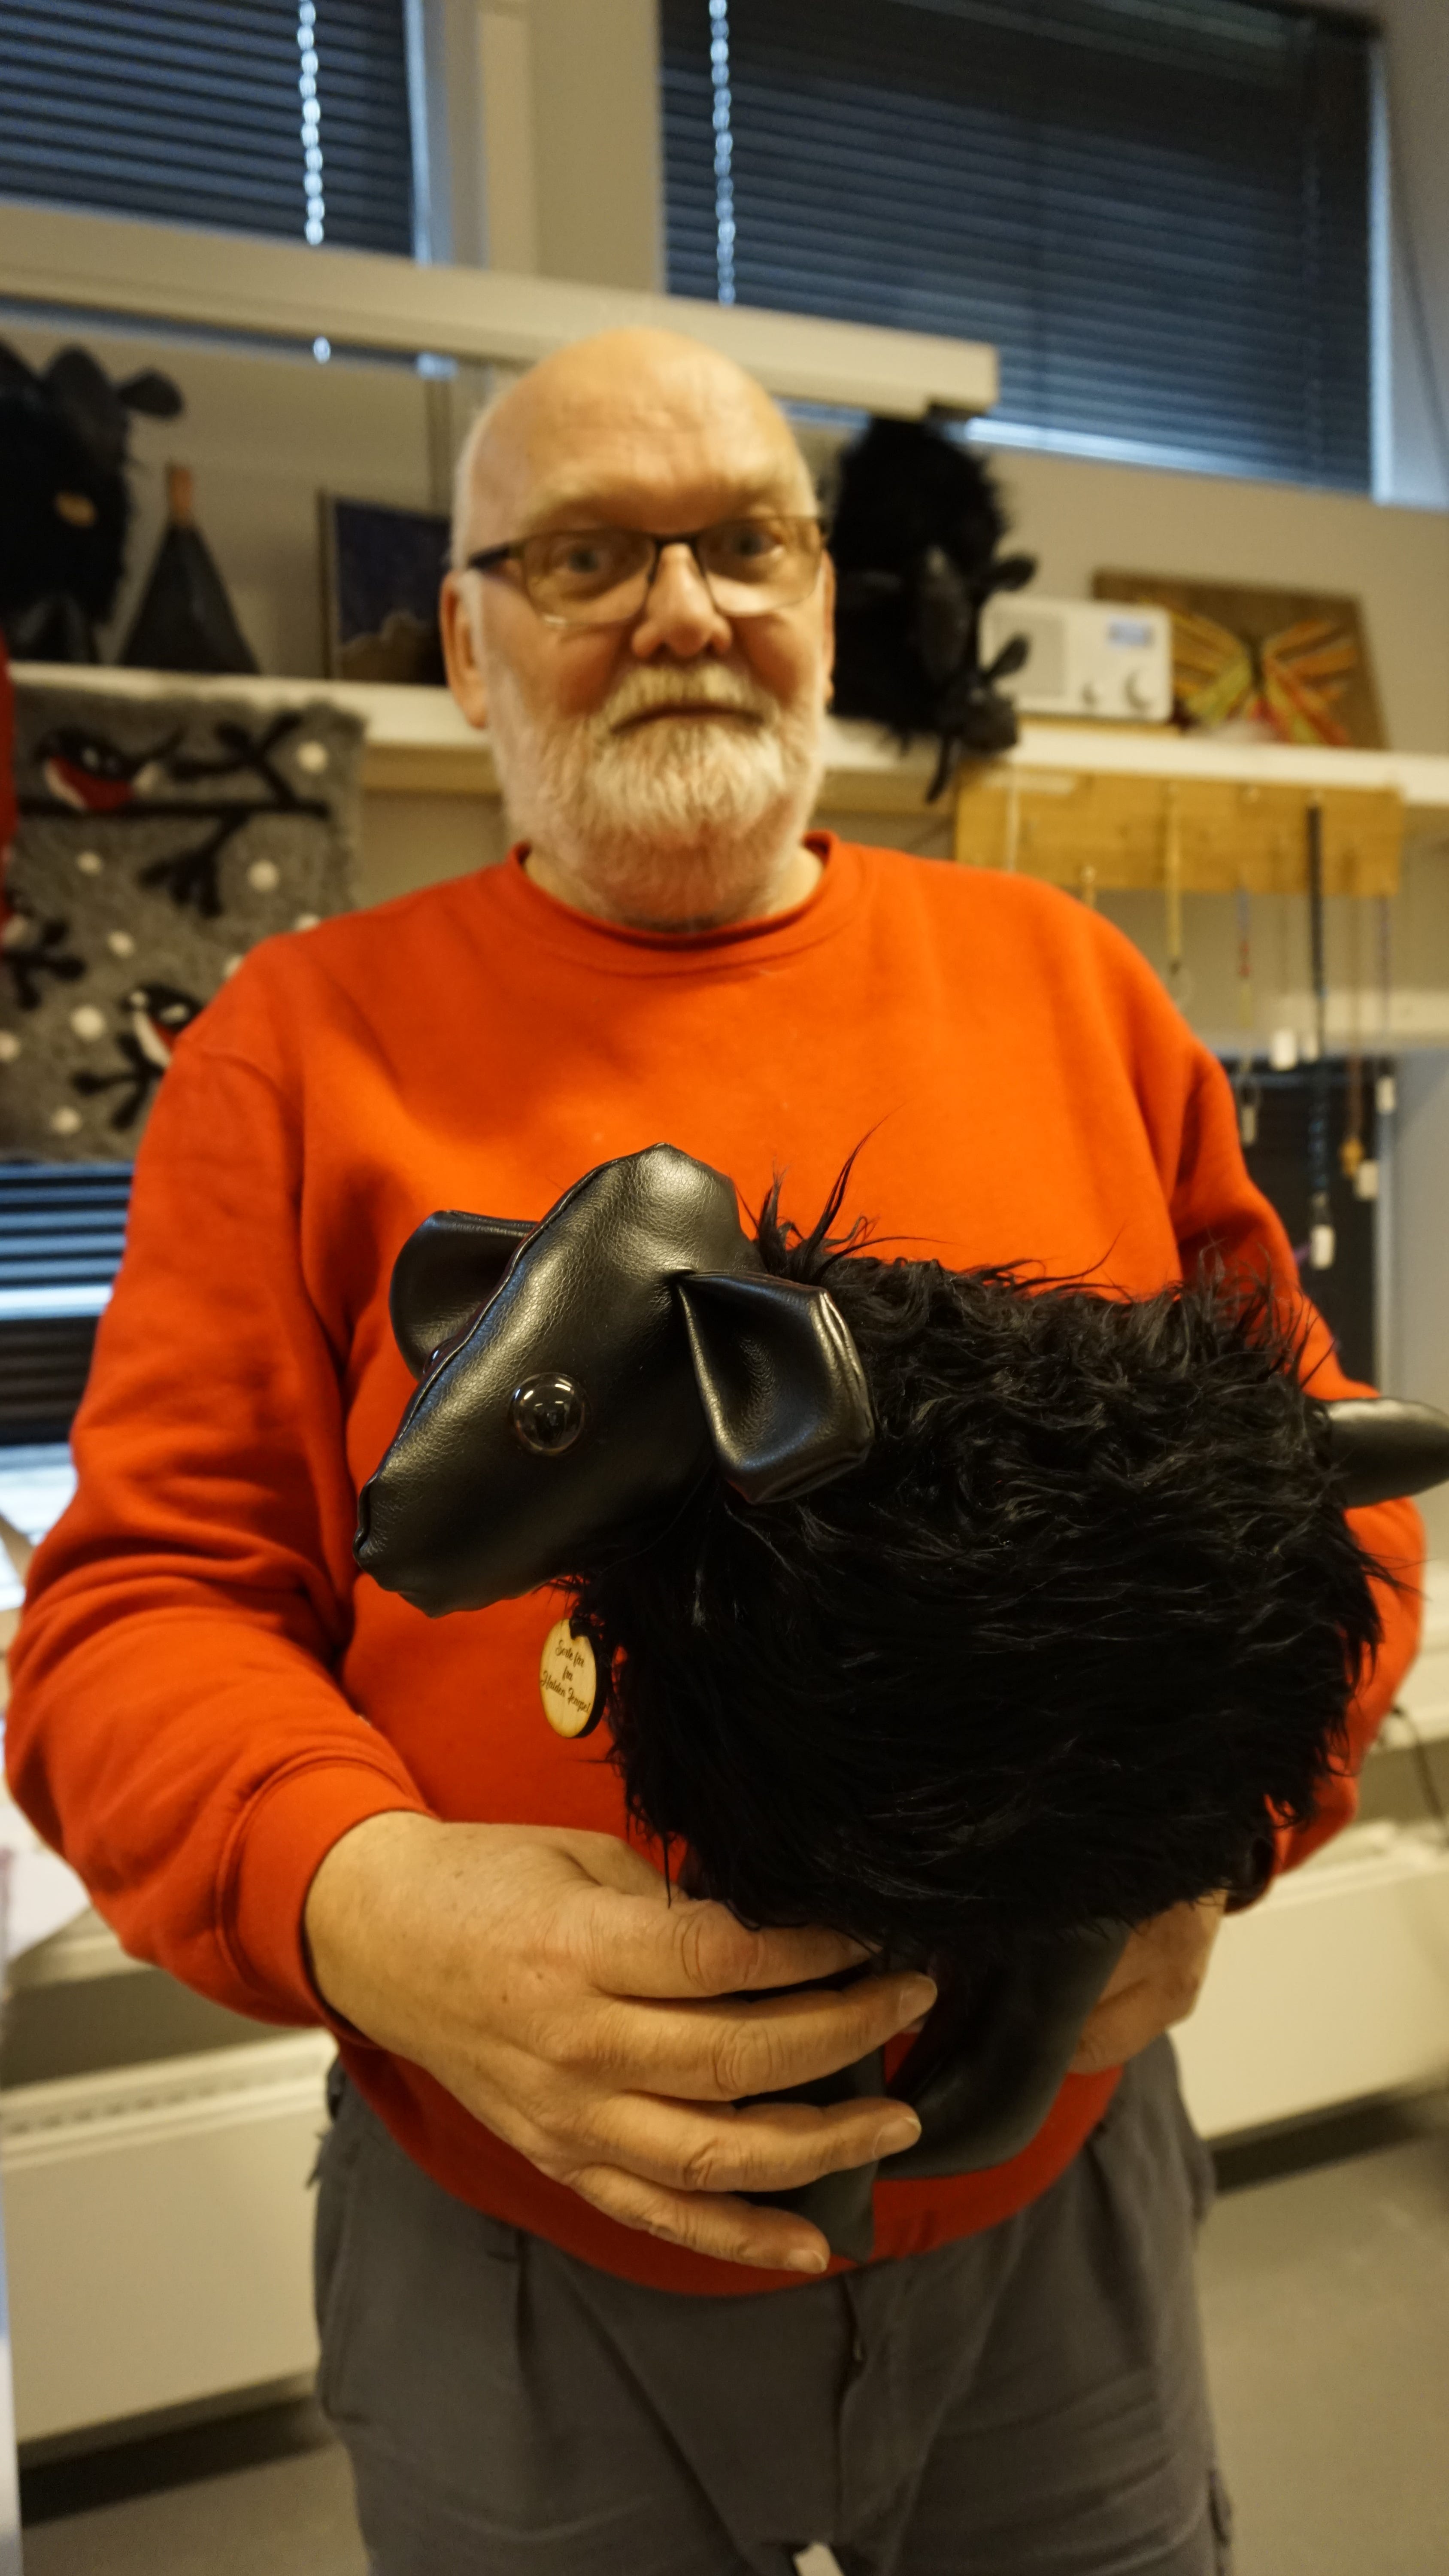 John Anders Braathen, an inmate at Halden Prison in Norway, said he enjoys chatting with other prisoners in the textiles studio at Halden while making creations like this wooly stuffed animal.